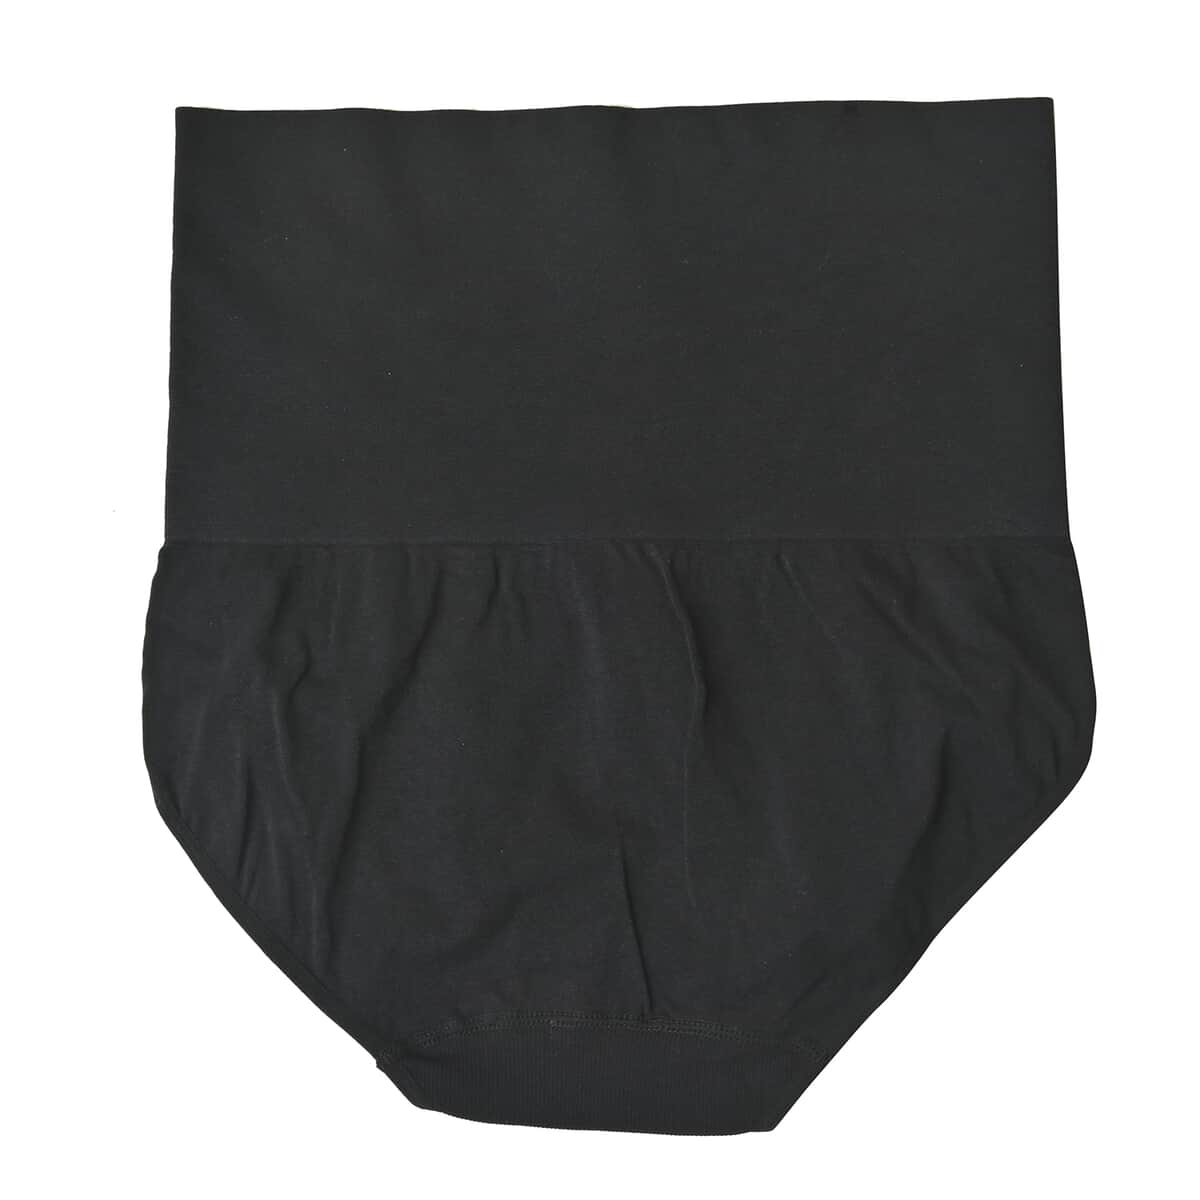 UNAIRE High Waist Shaping Brief - Black (1X) image number 2